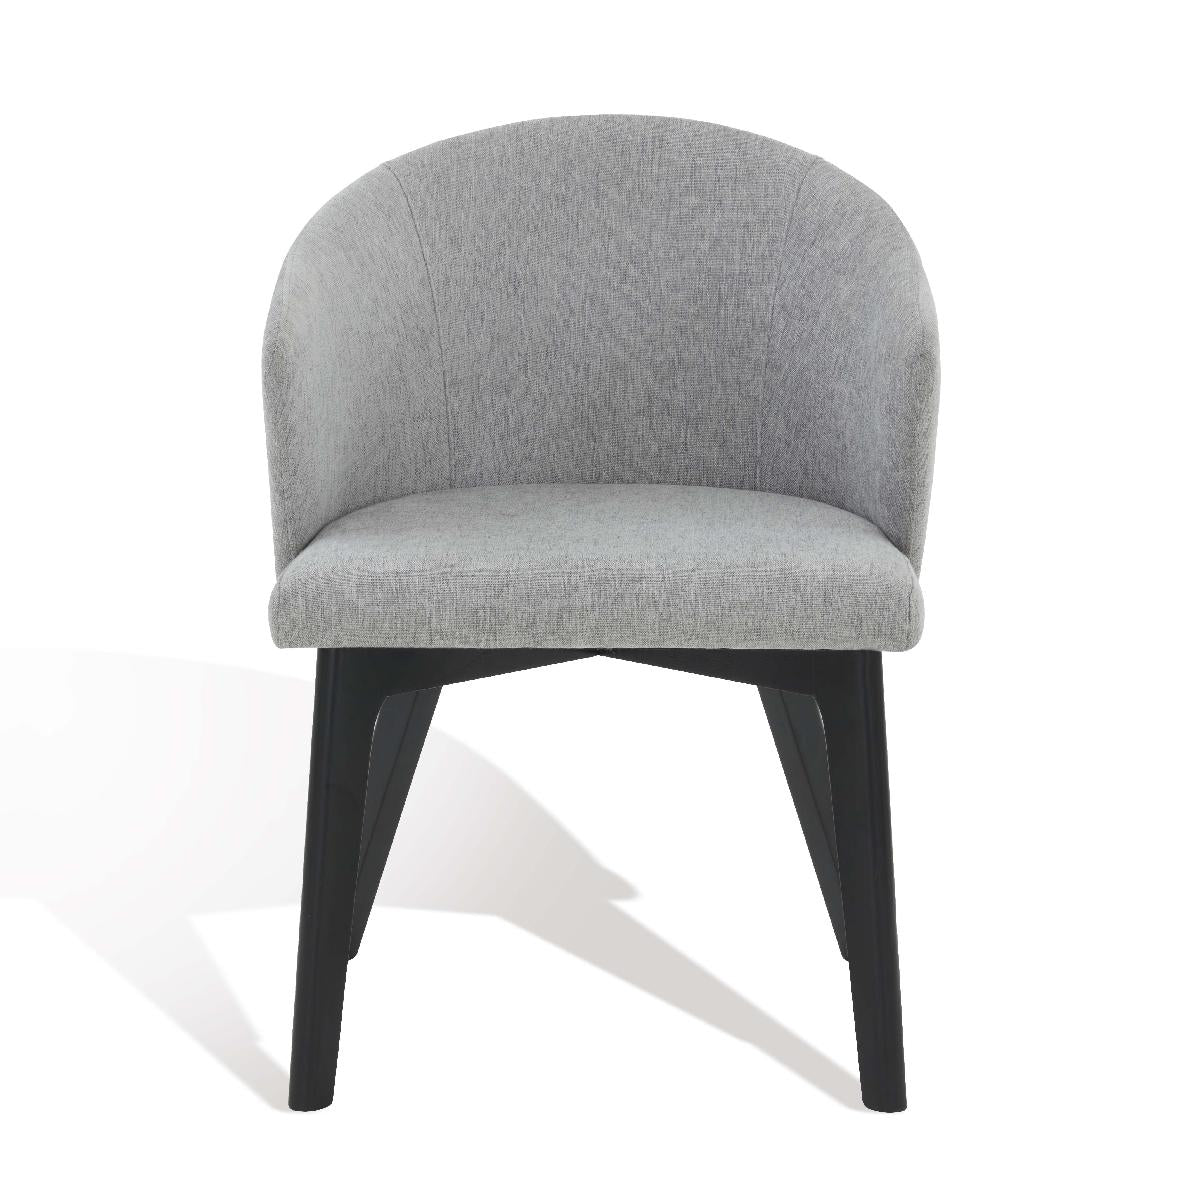 Safavieh Couture Wynonna Linen Dining Chair